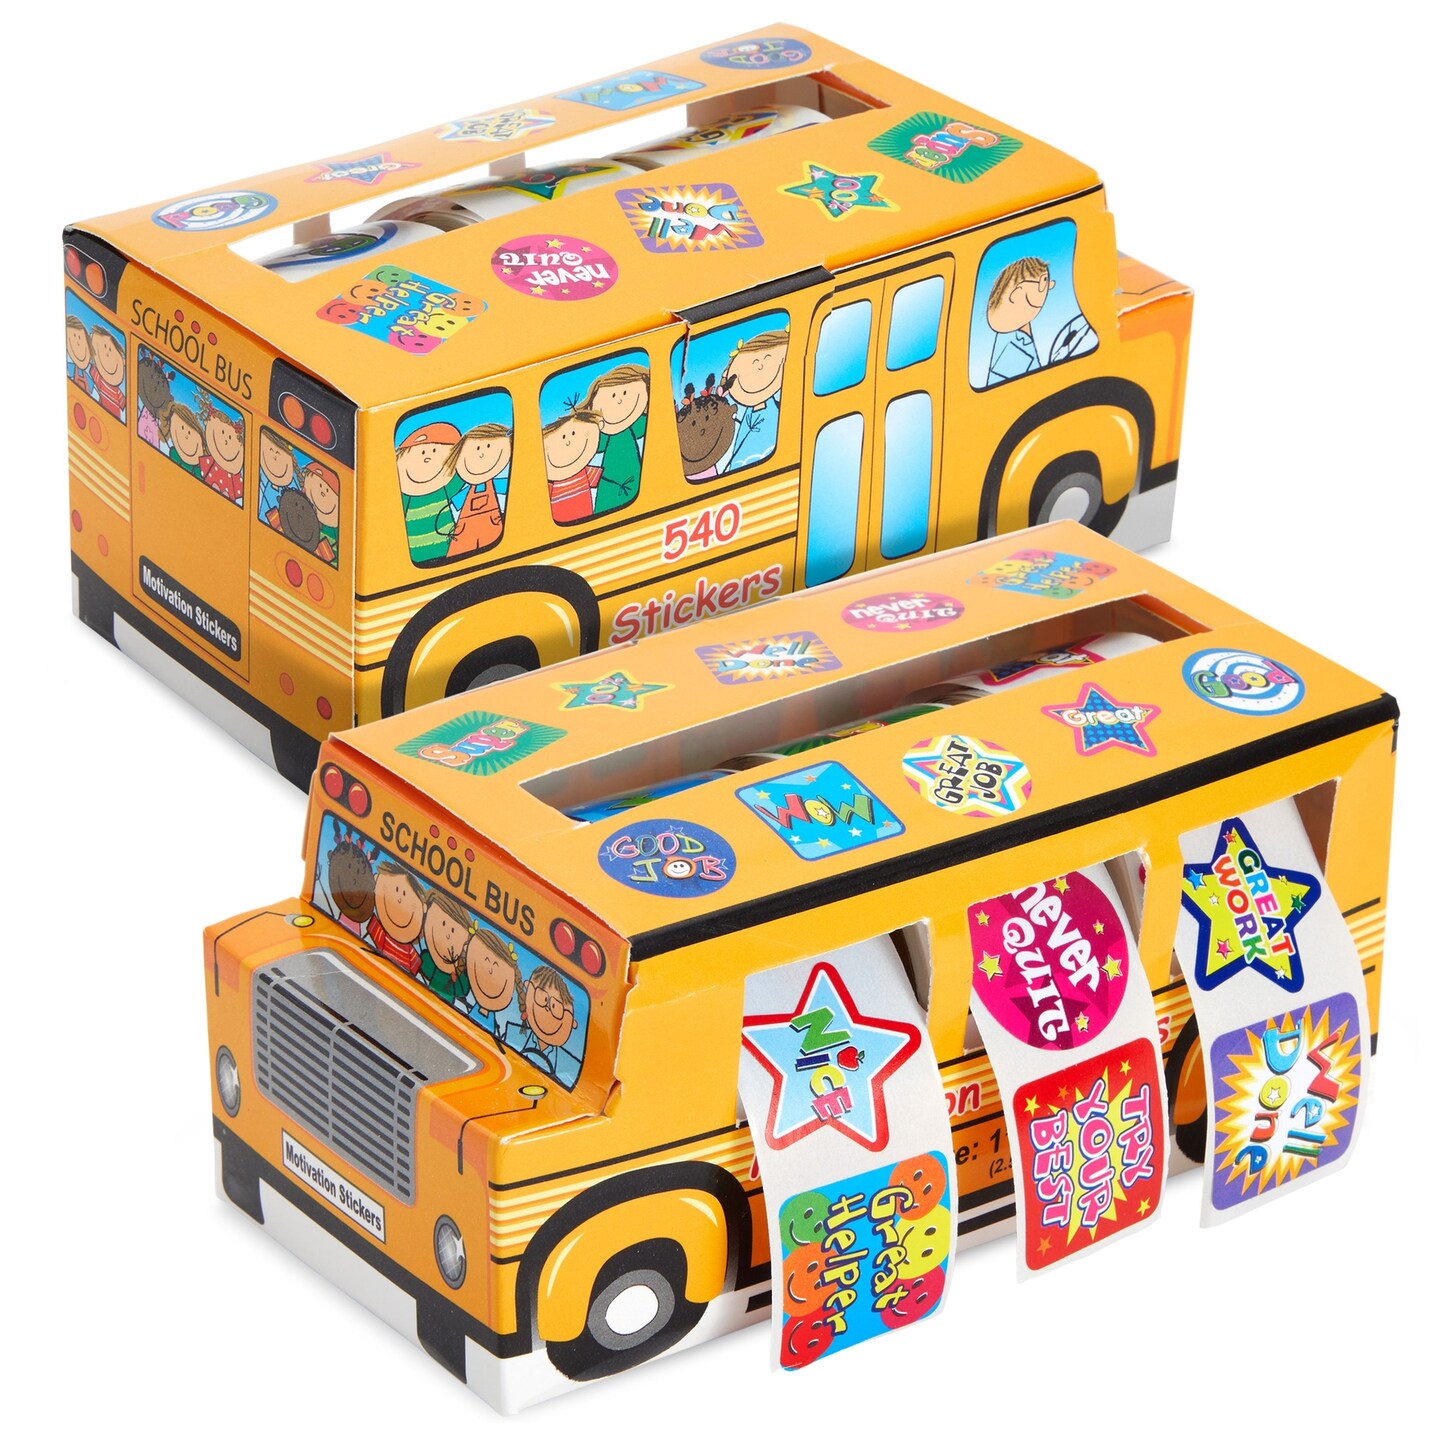 1080 Count Teacher Reward Stickers for Students with 2 School Bus Dispensers (6 Rolls, 5.75 x 2.75 x 2.5 In)